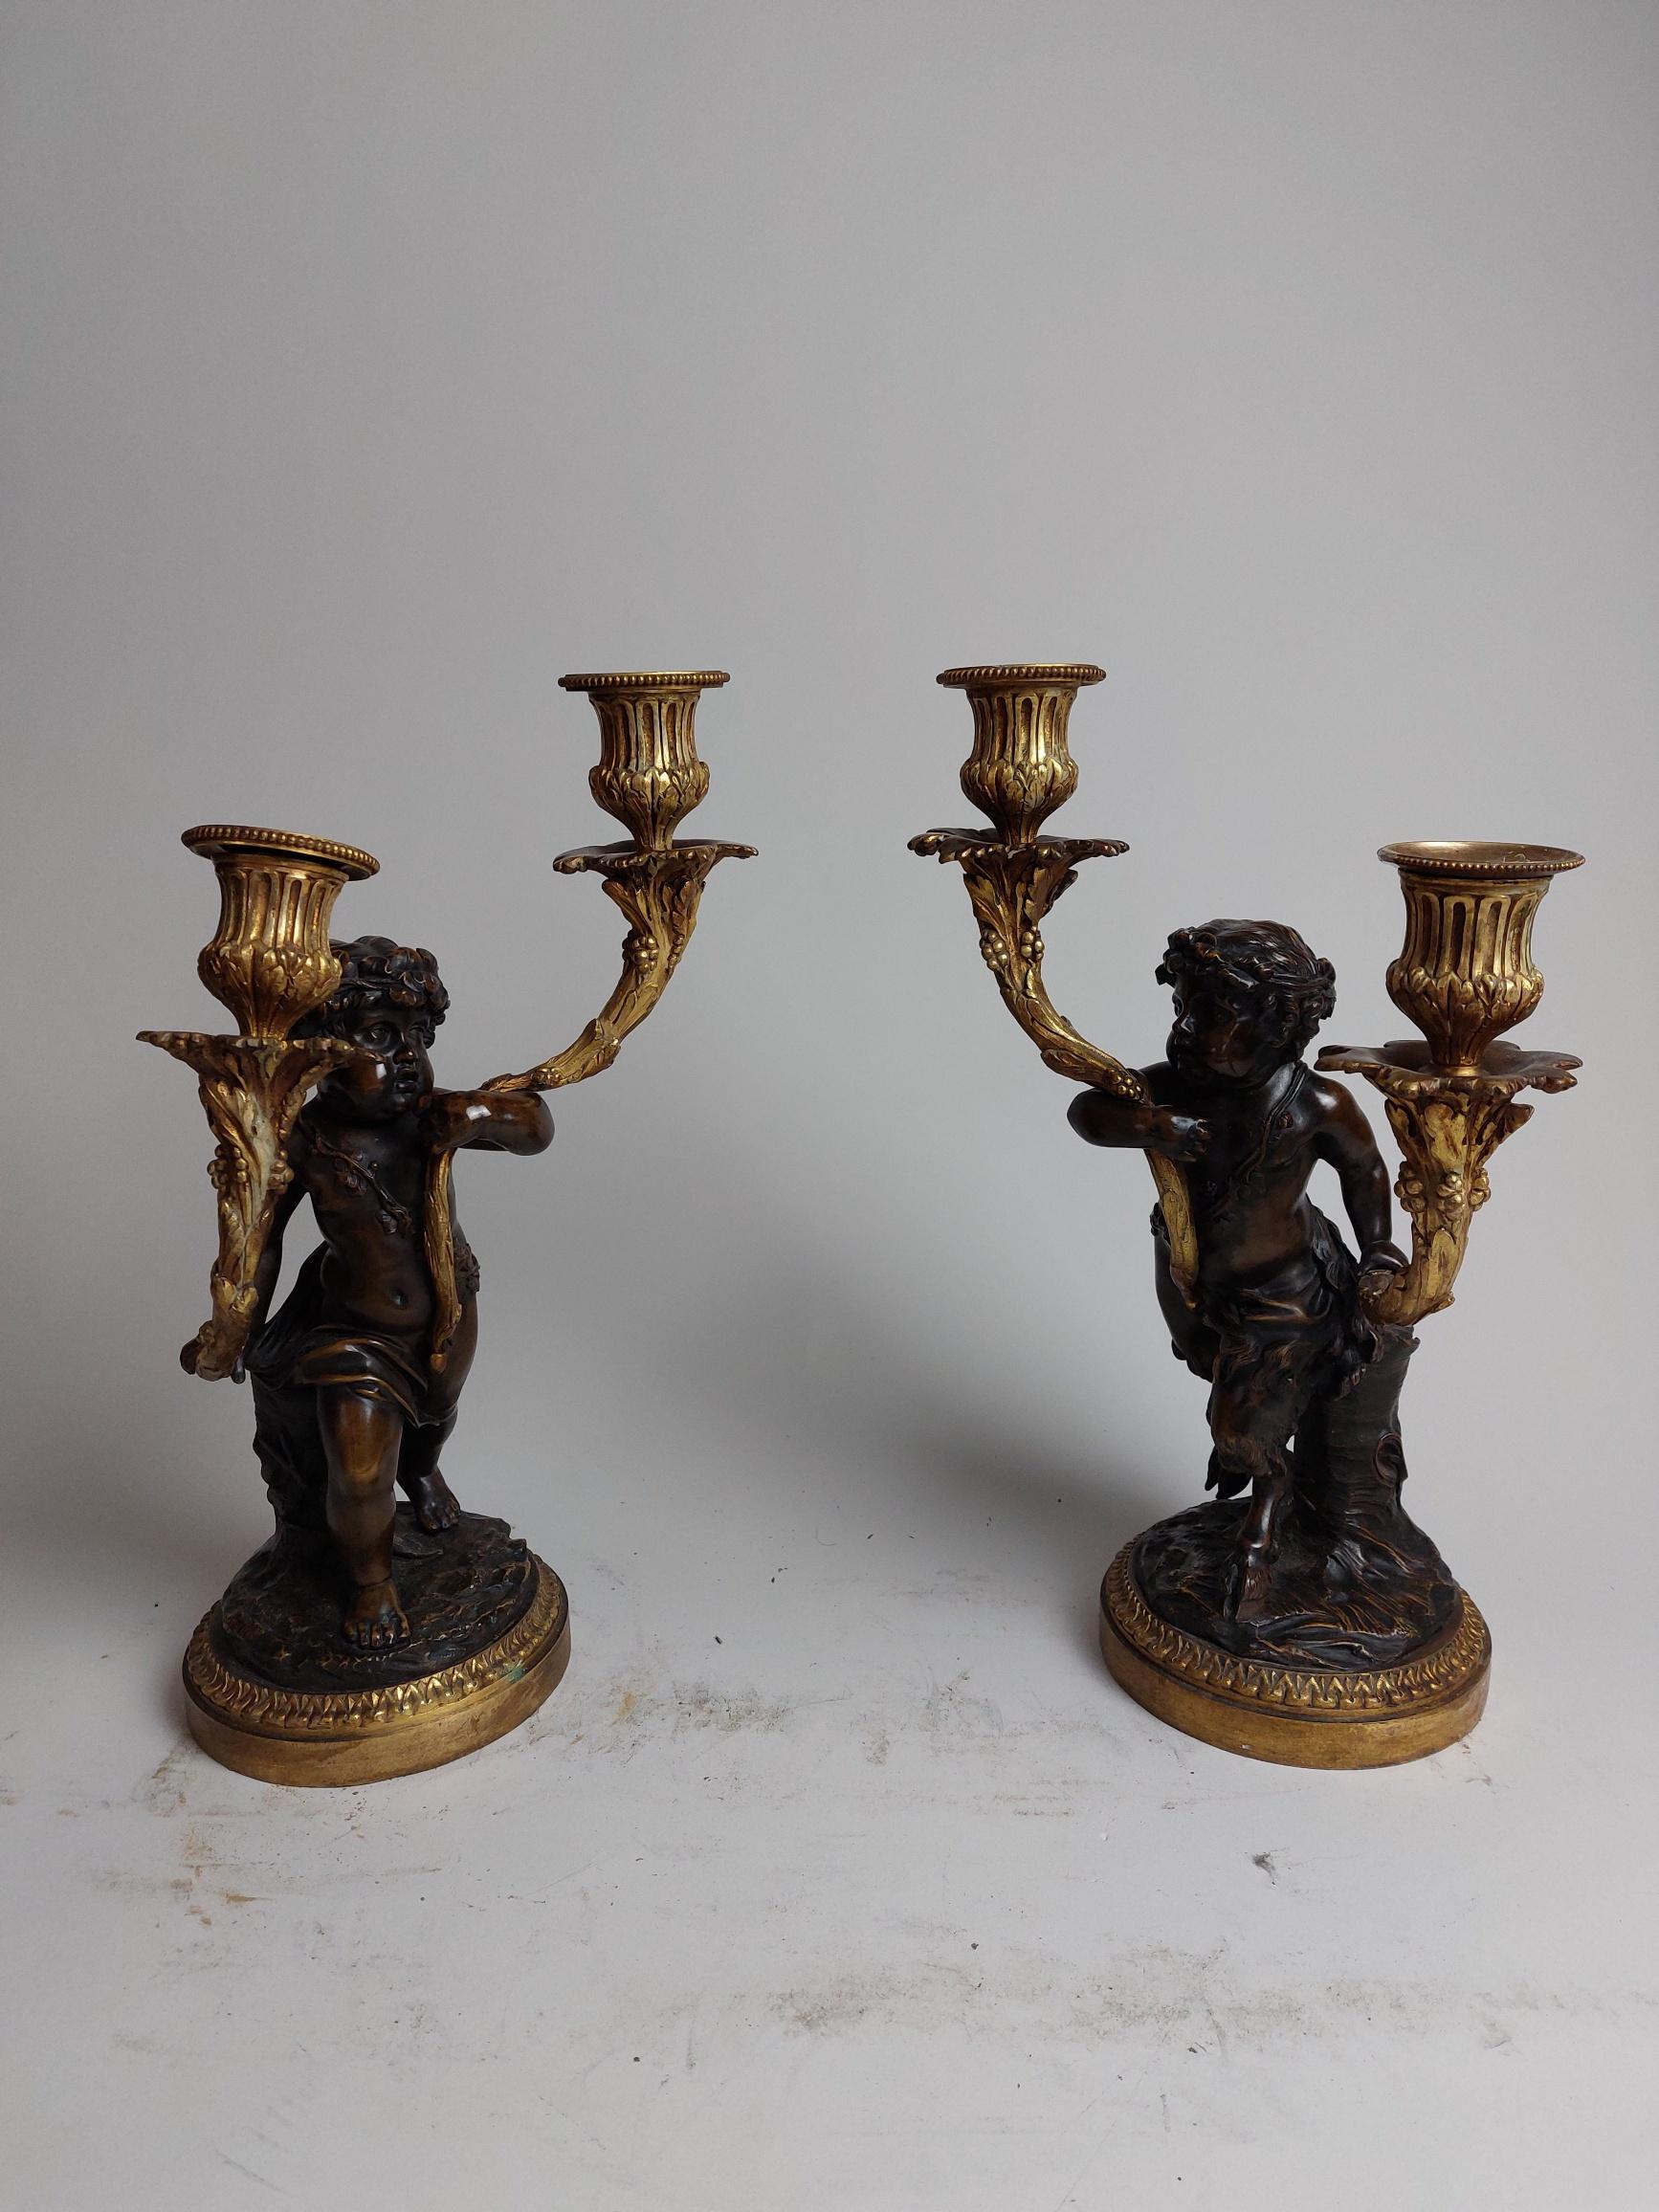 A pair of naturalistic 19th century ormolu candlestick holders held by bronze fawns.